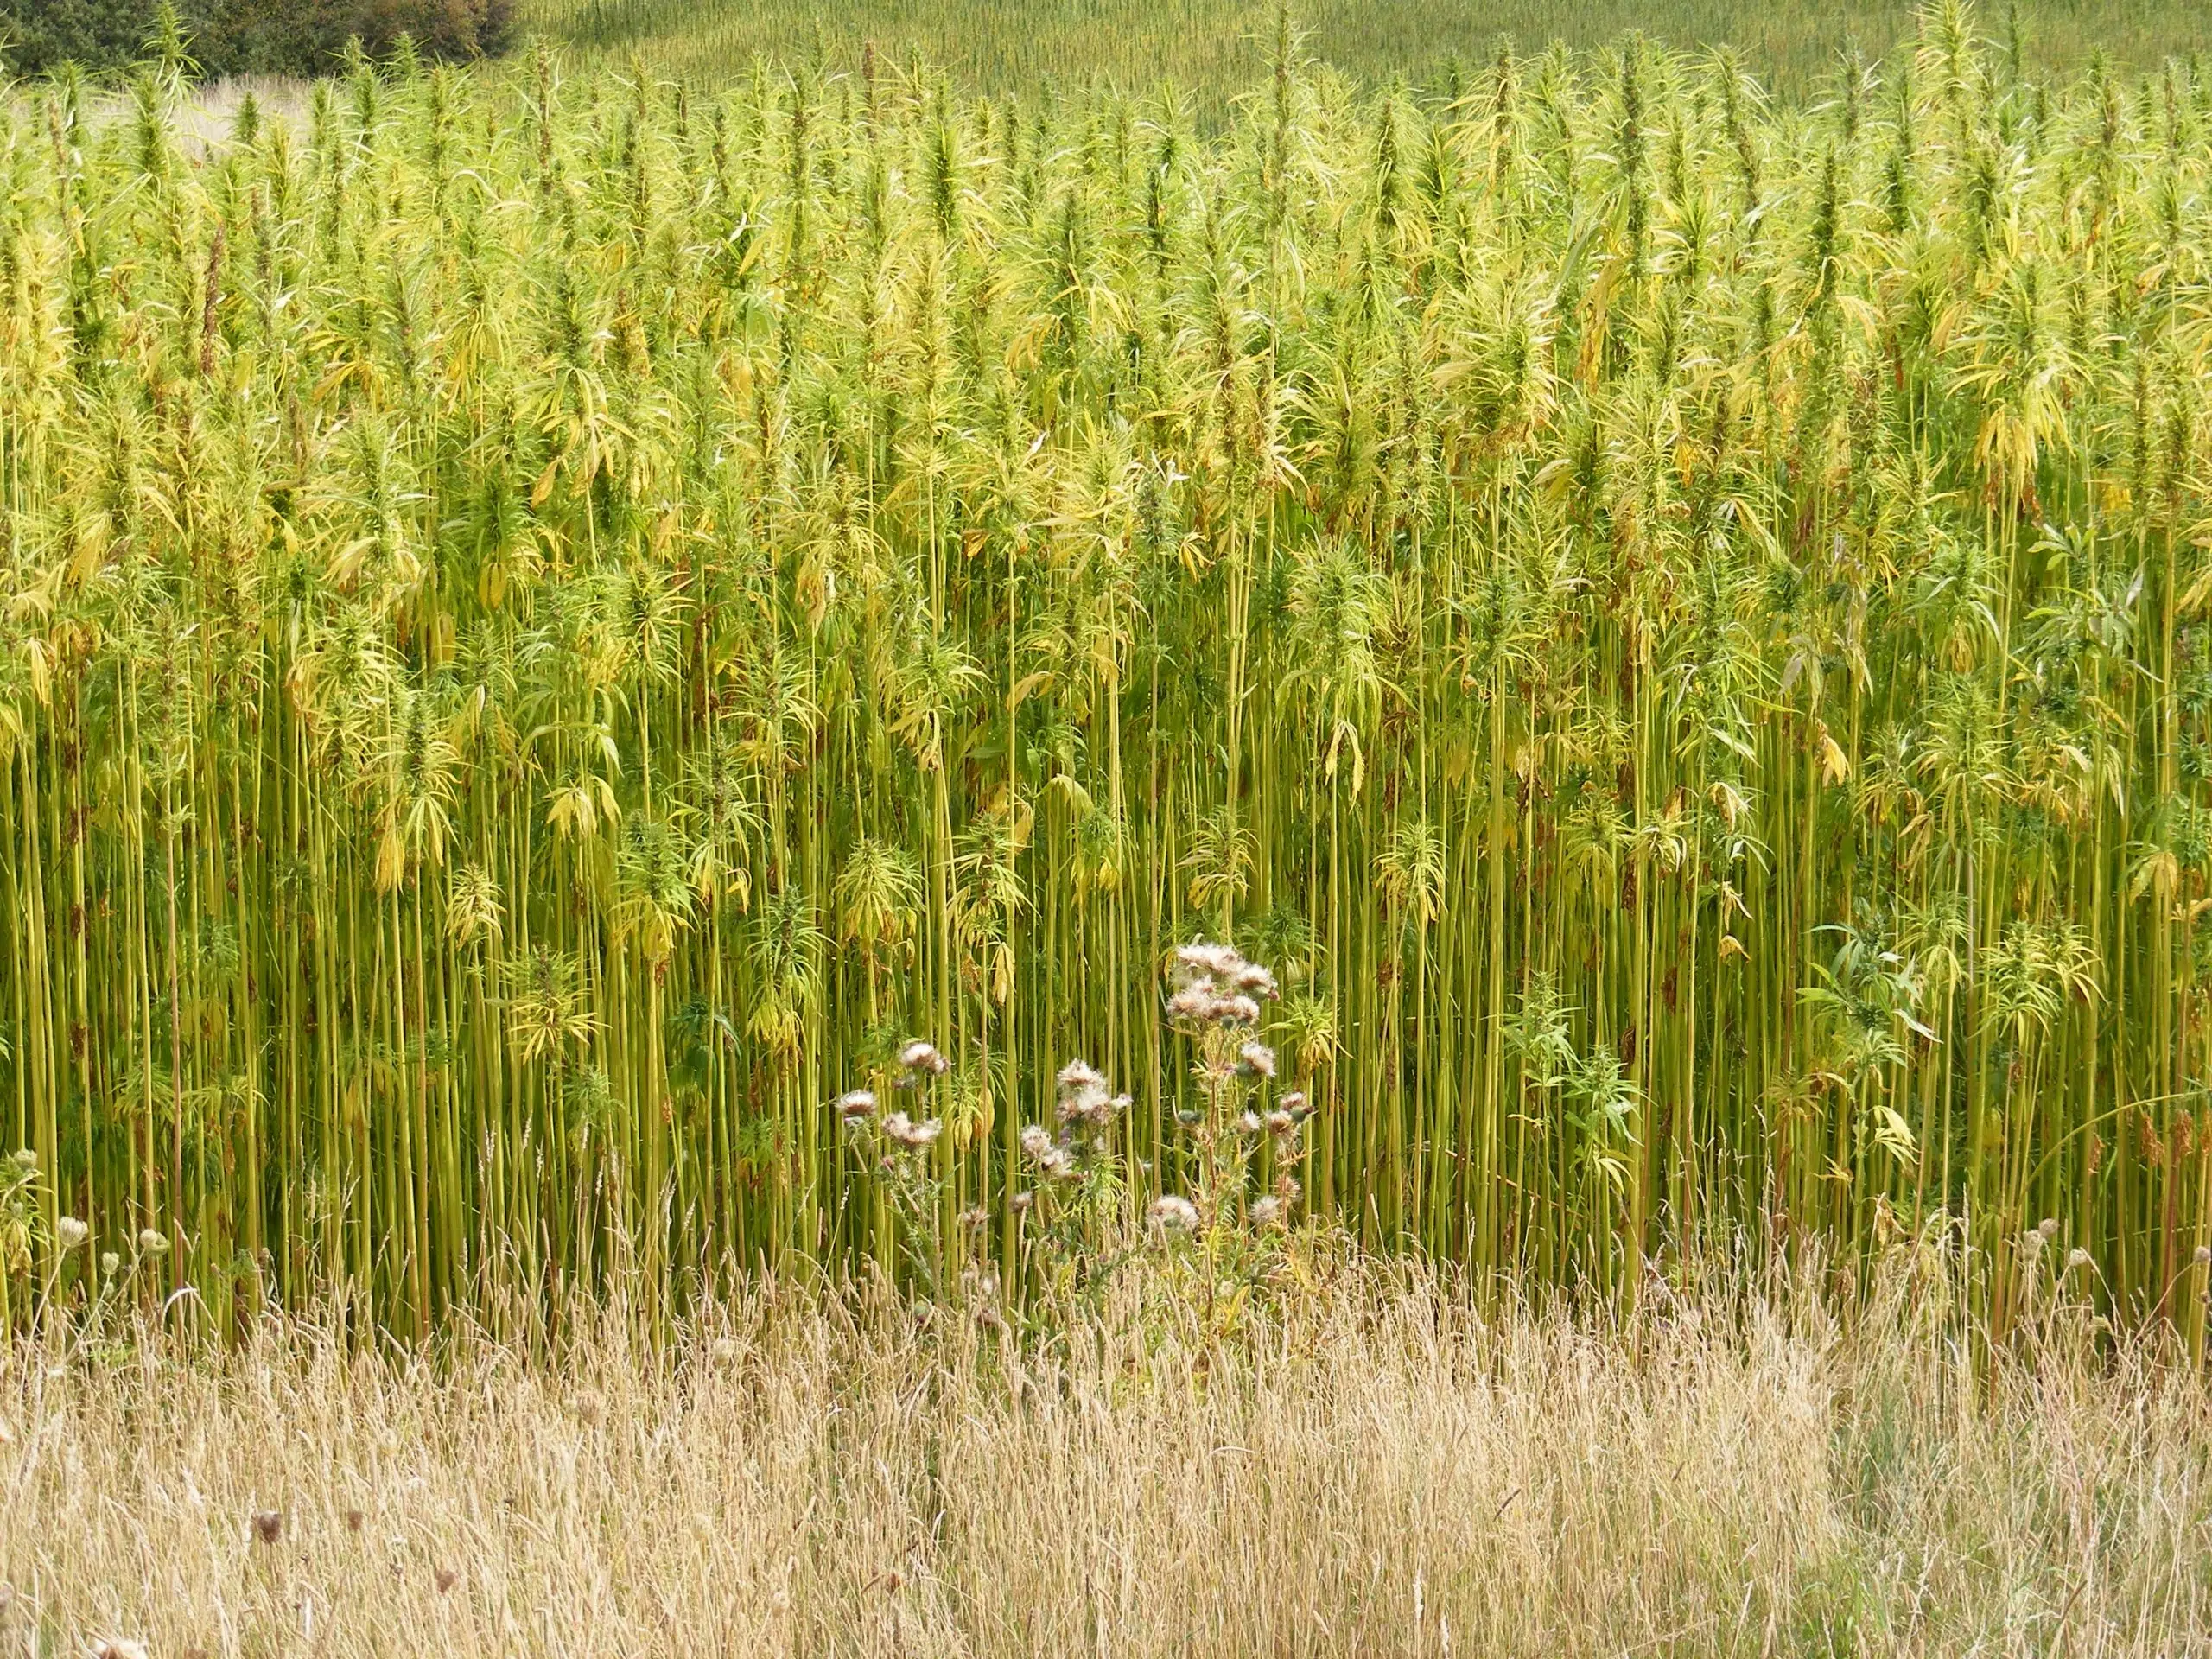 No green light for government growing hemp in the Thompson-Nicola region